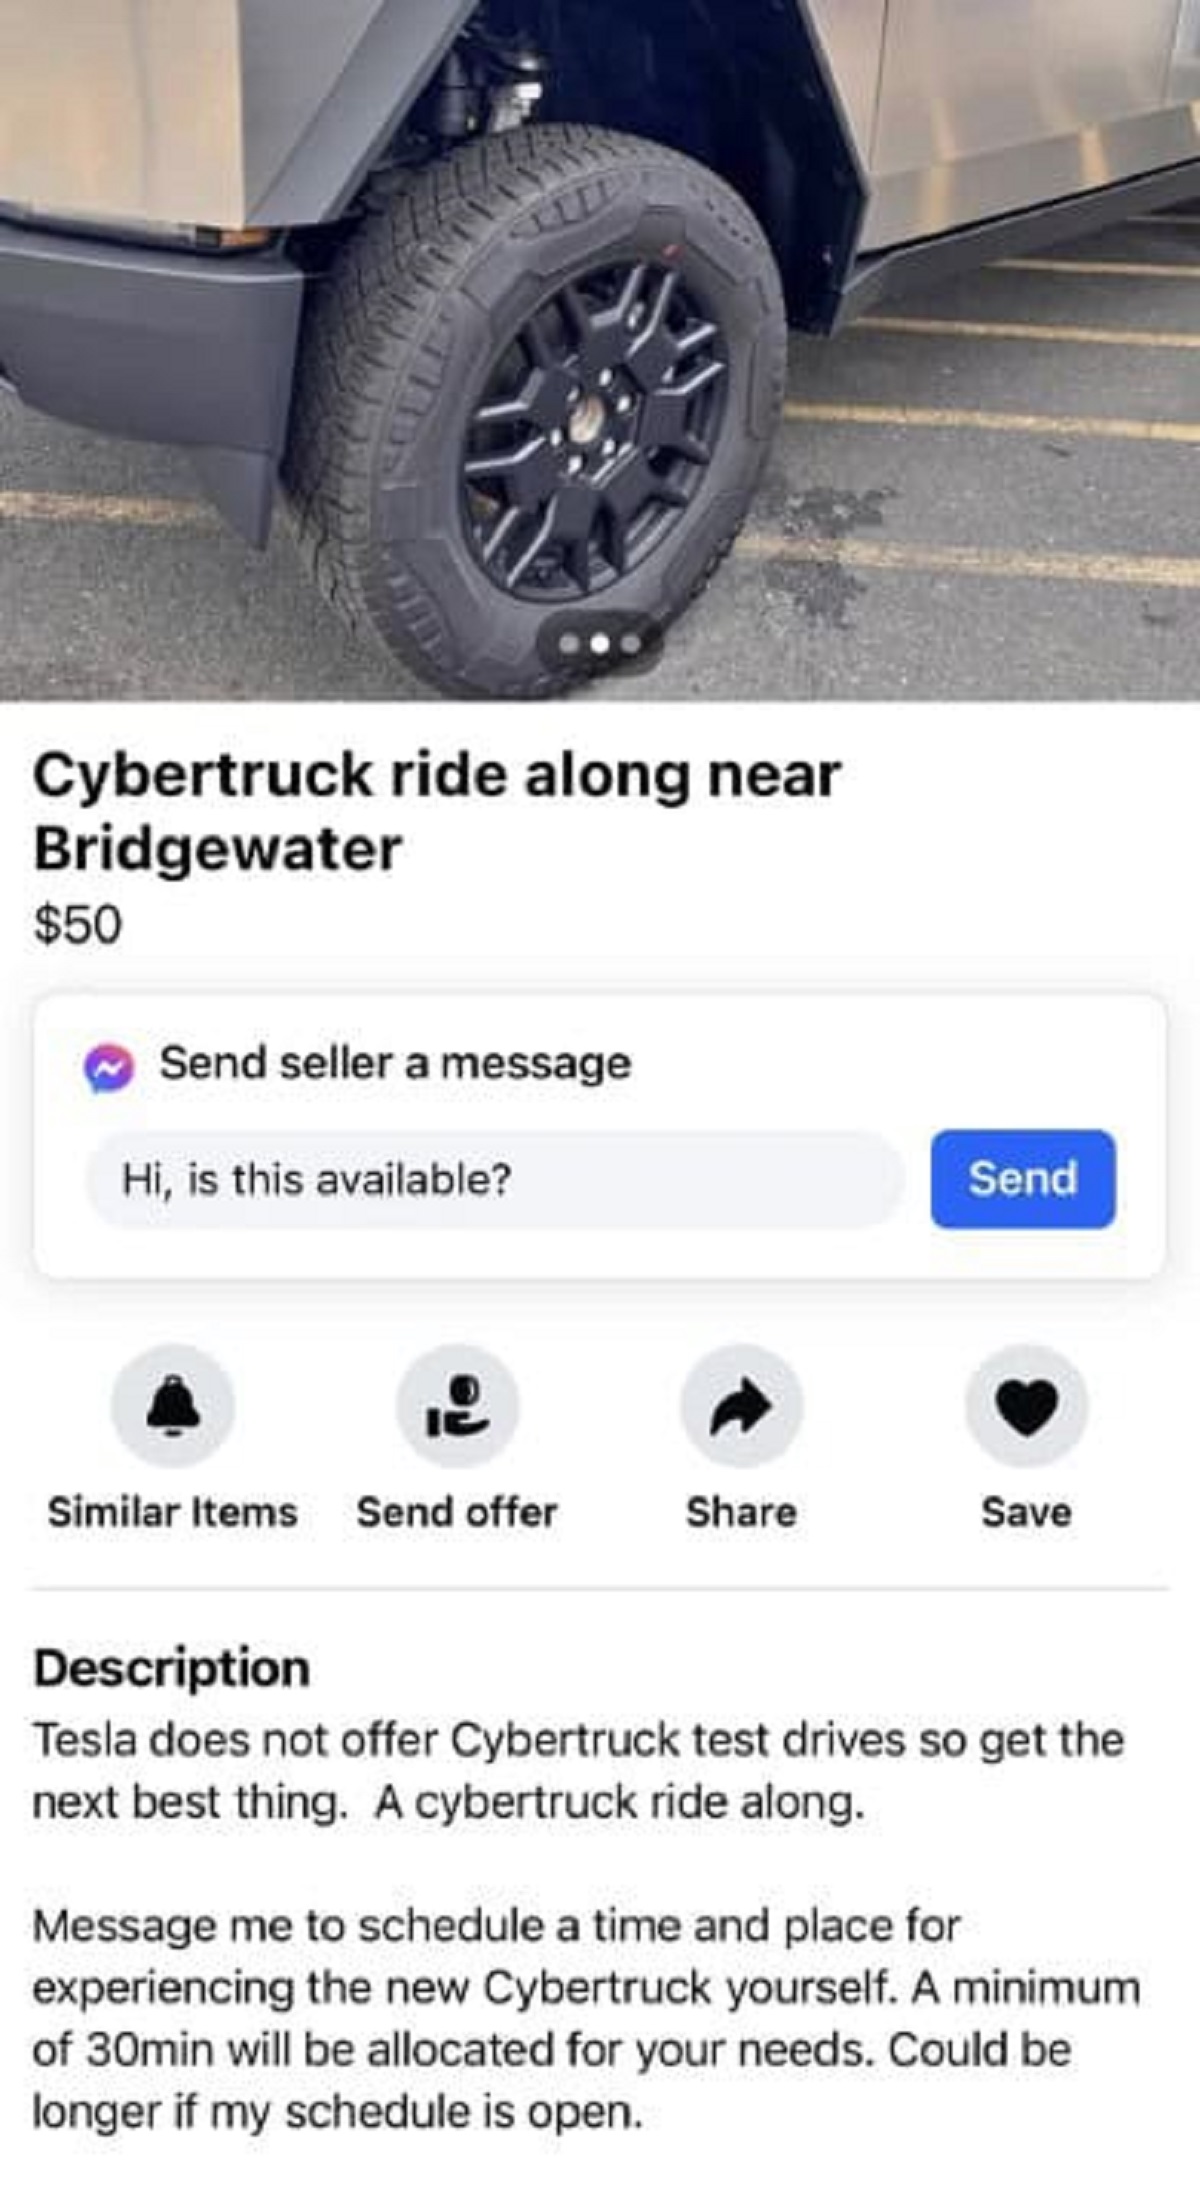 Sales - Cybertruck ride along near Bridgewater $50 Send seller a message Hi, is this available? Send Similar Items Send offer Save Description Tesla does not offer Cybertruck test drives so get the next best thing. A cybertruck ride along. Message me to s